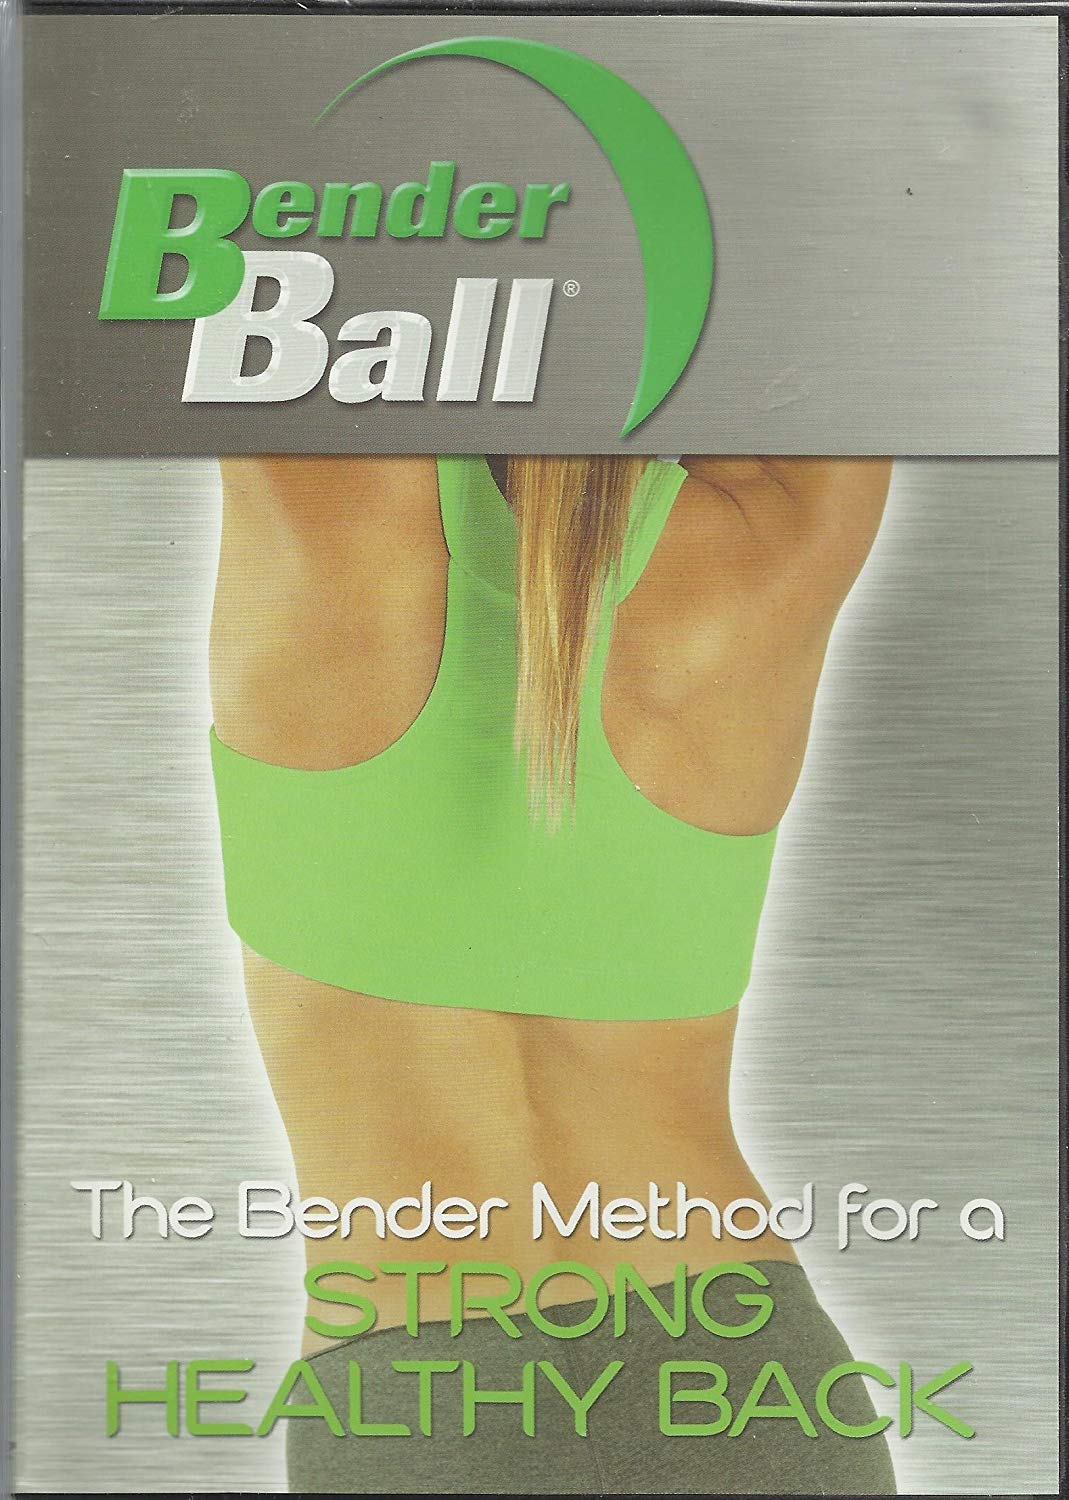 The Bender Method for a Strong Healthy Back Dvd! Bender Ball